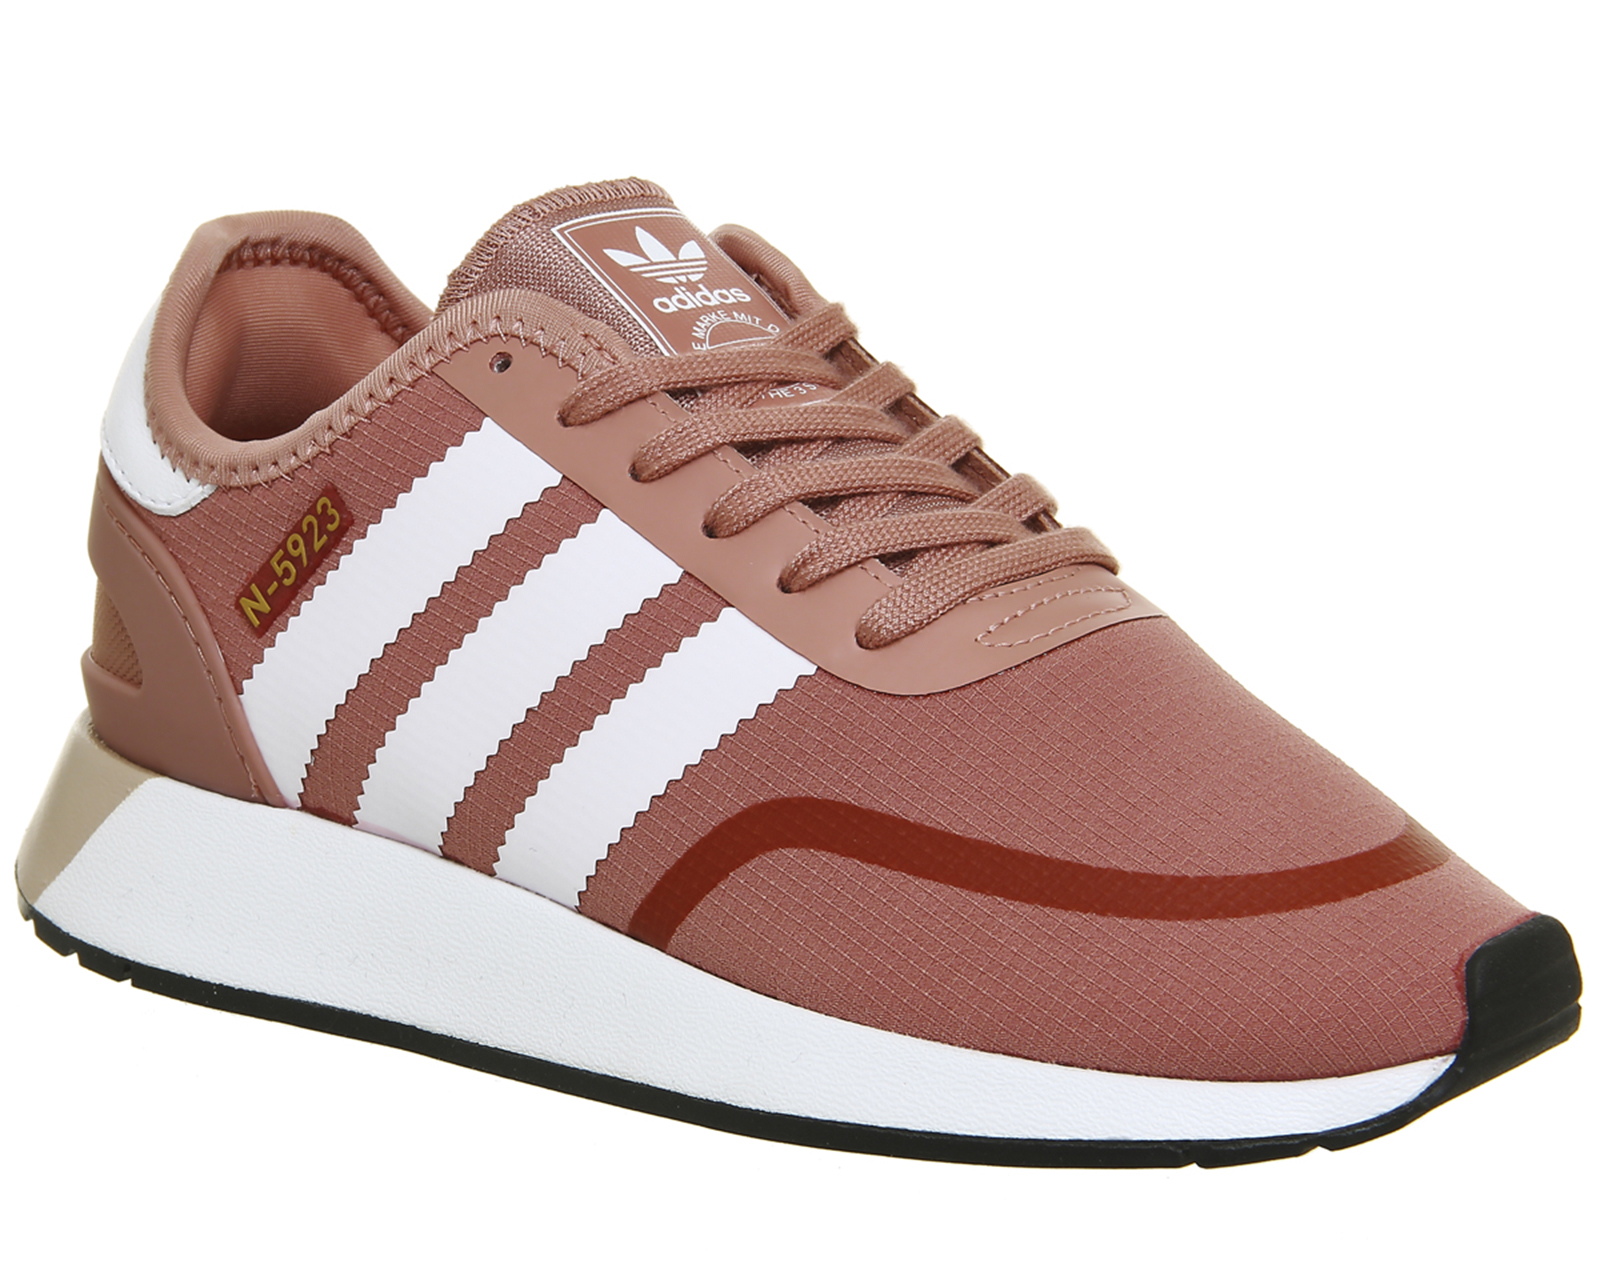 adidas N-5923 Trainers Ash Pink - Hers trainers